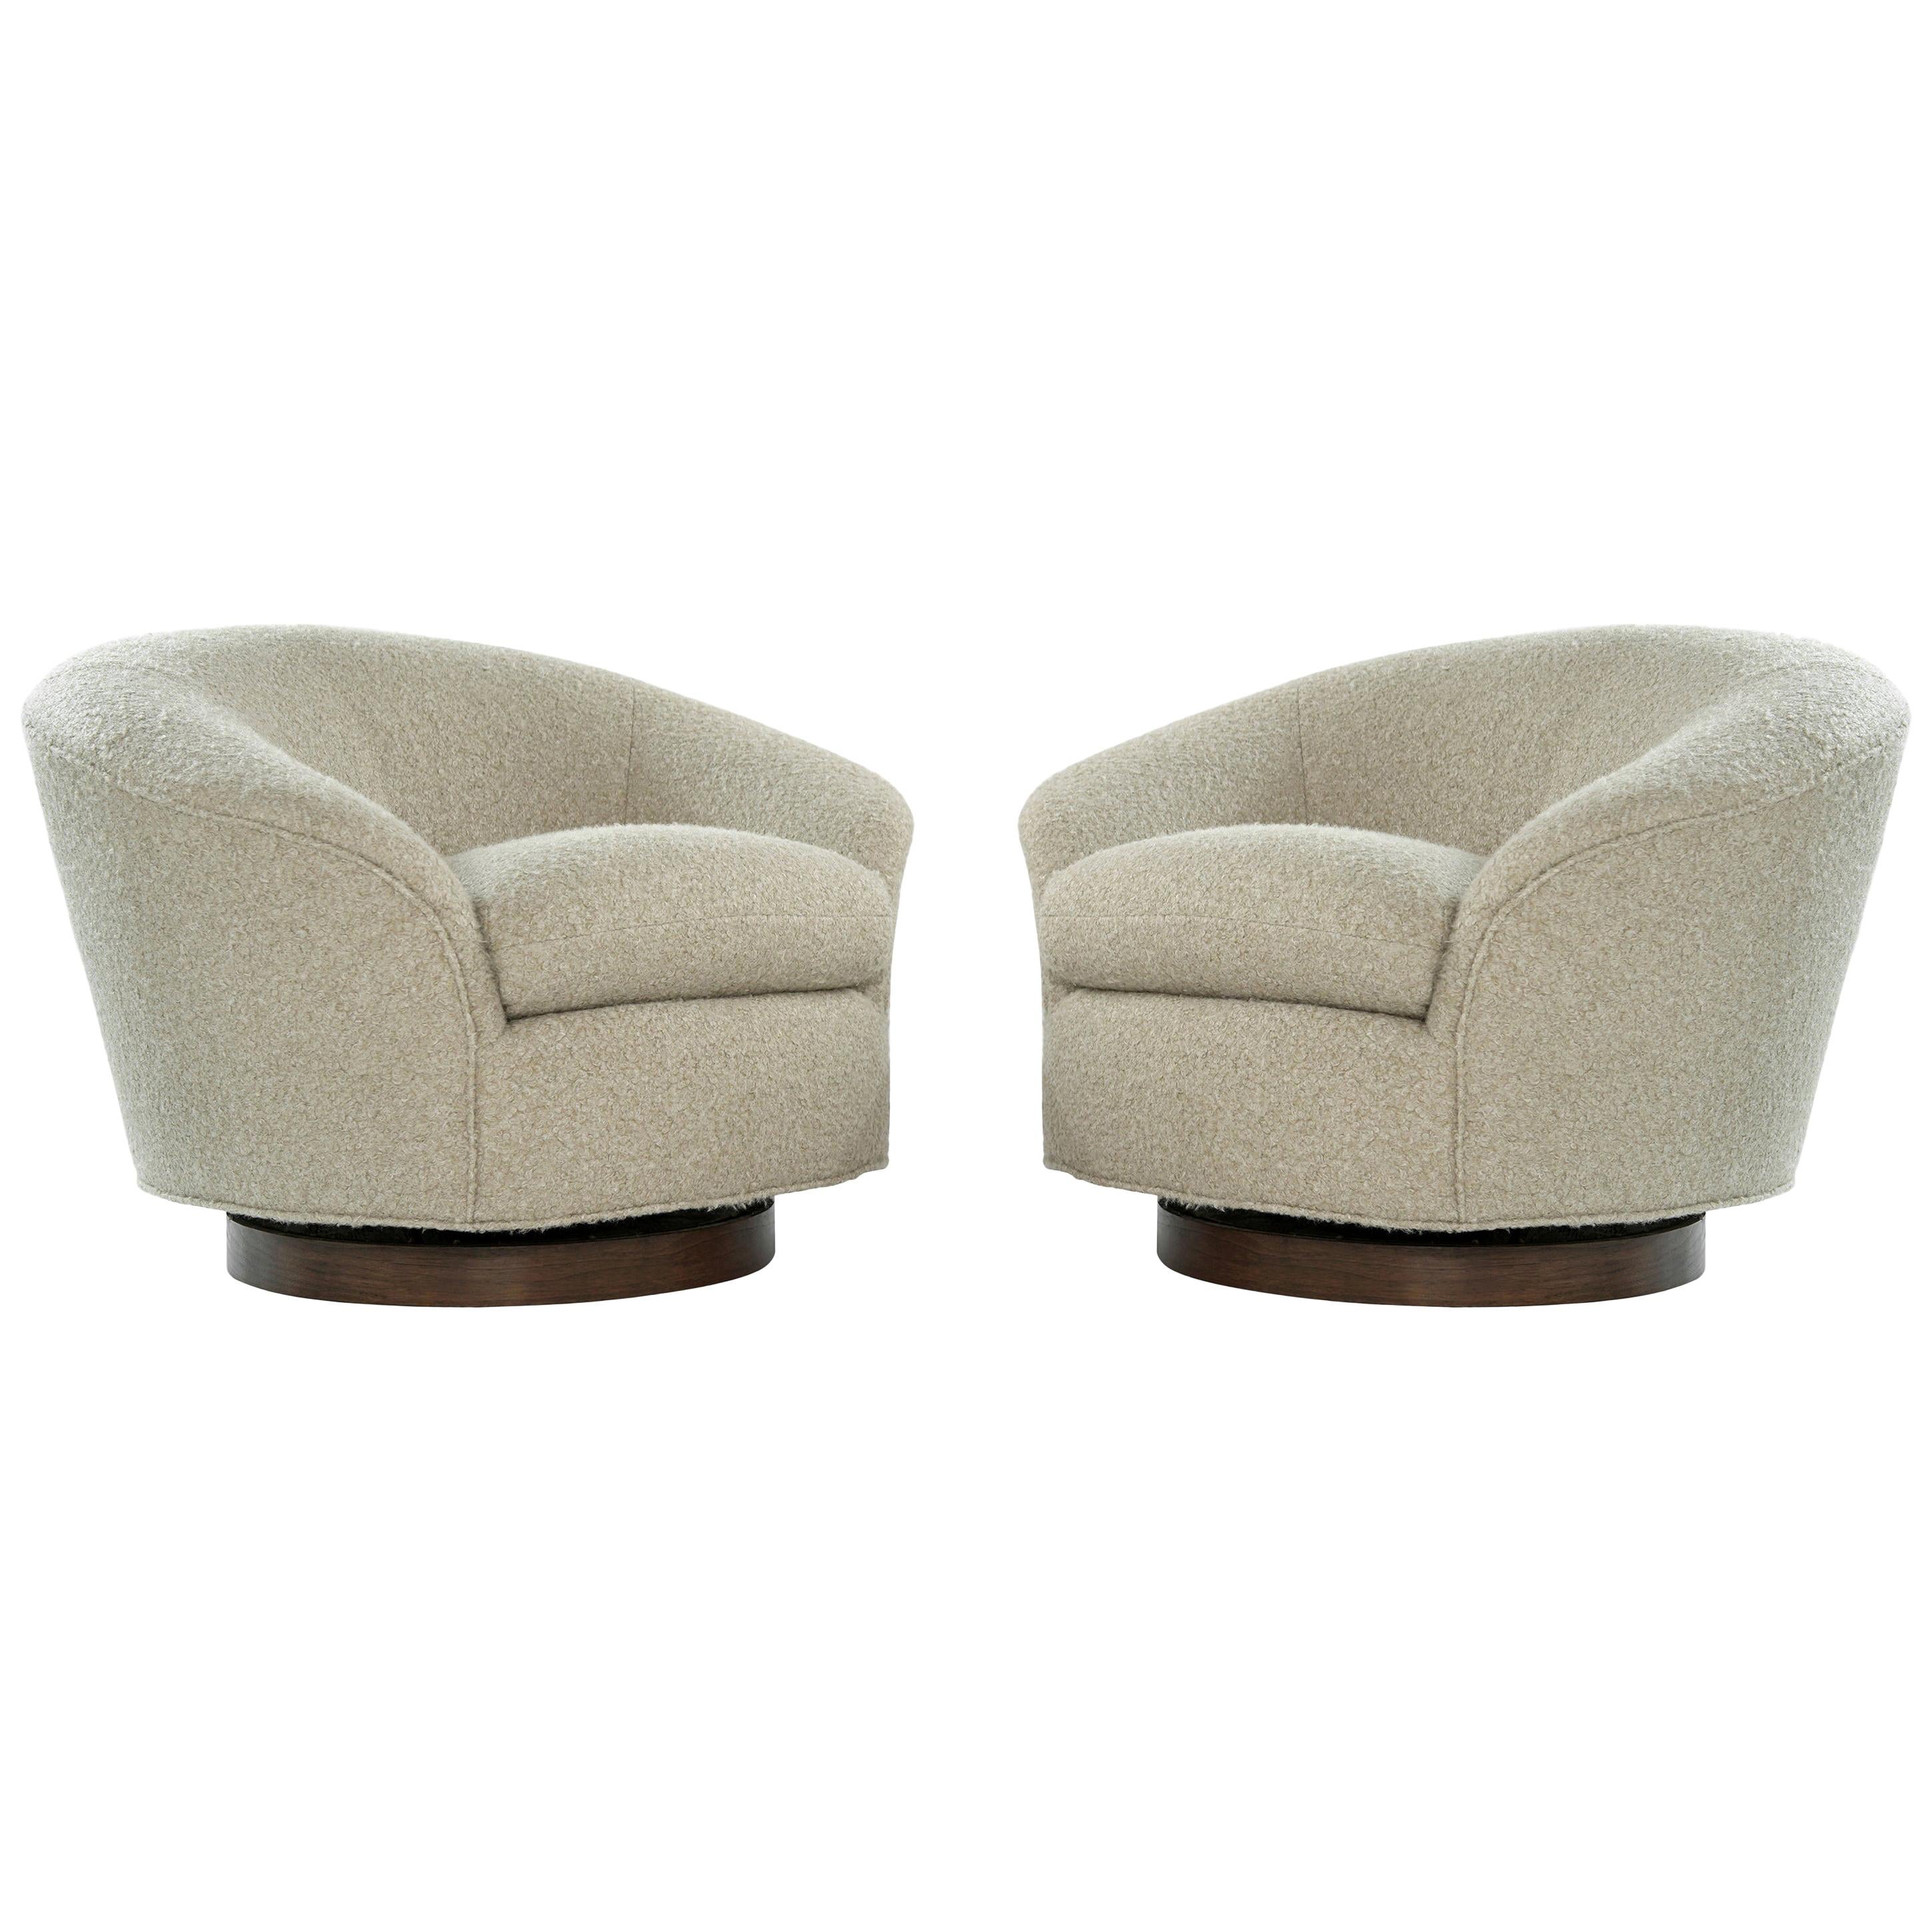 Set of Swivel Chairs in Bouclé by Directional, circa 1970s